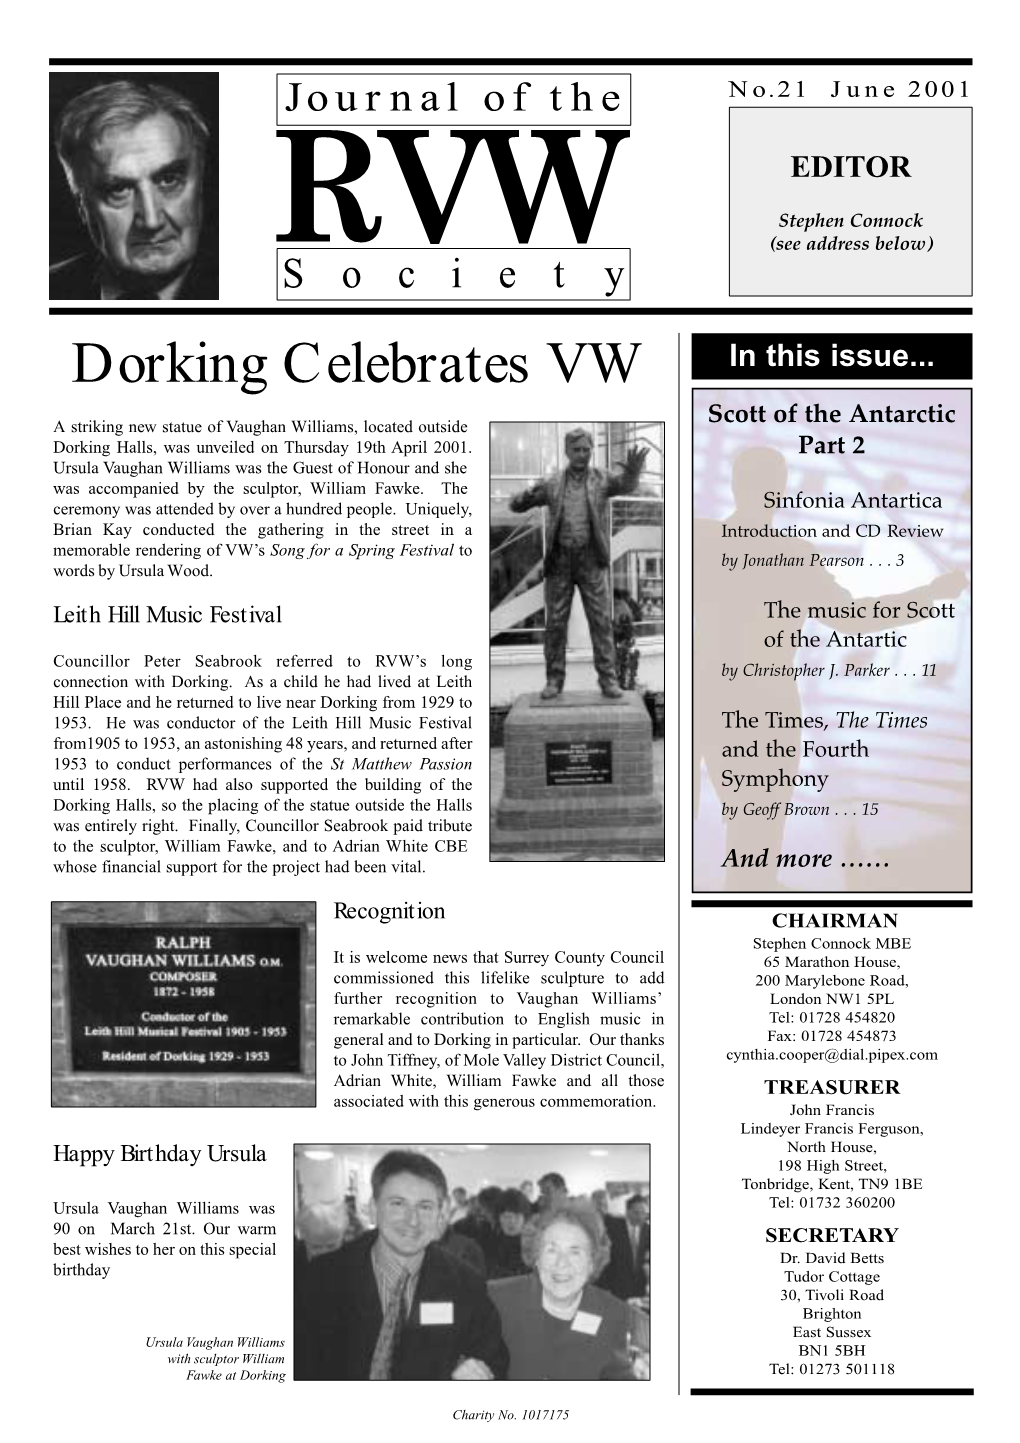 Dorking Celebrates VW in This Issue